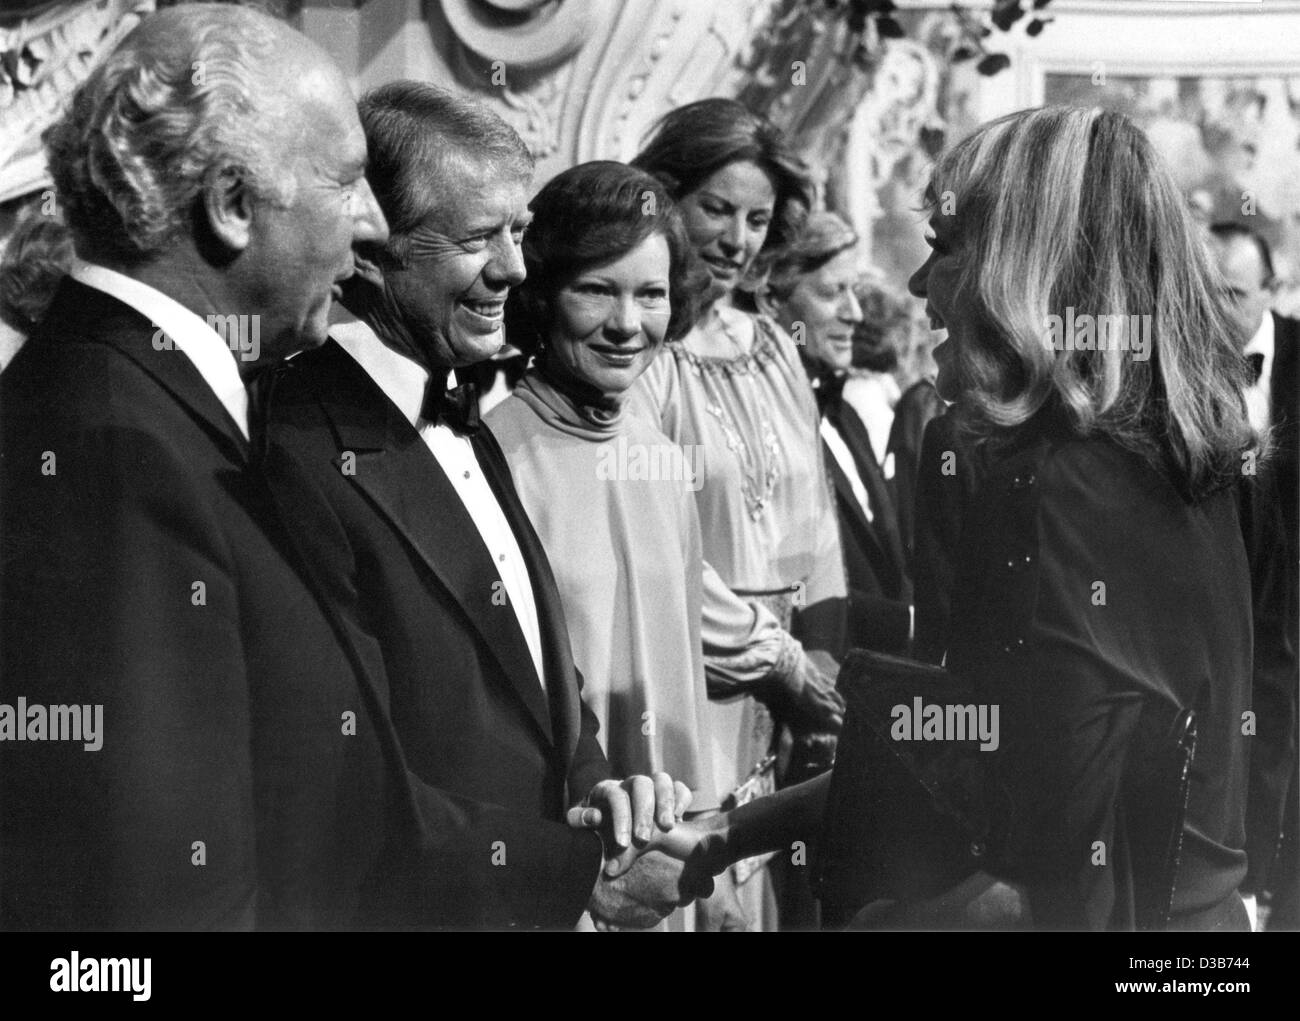 (dpa files) - German President Walter Scheel (L), US President Jimmy Carter (C) and his wife Rosalynn (C) chat with German actress and singer Hildegard Knef (R) as they greet guests of honour in the Augustusburg Castle near Bonn, West Germany, 14 July 1978. In the background next to Rosalynn Carter  Stock Photo